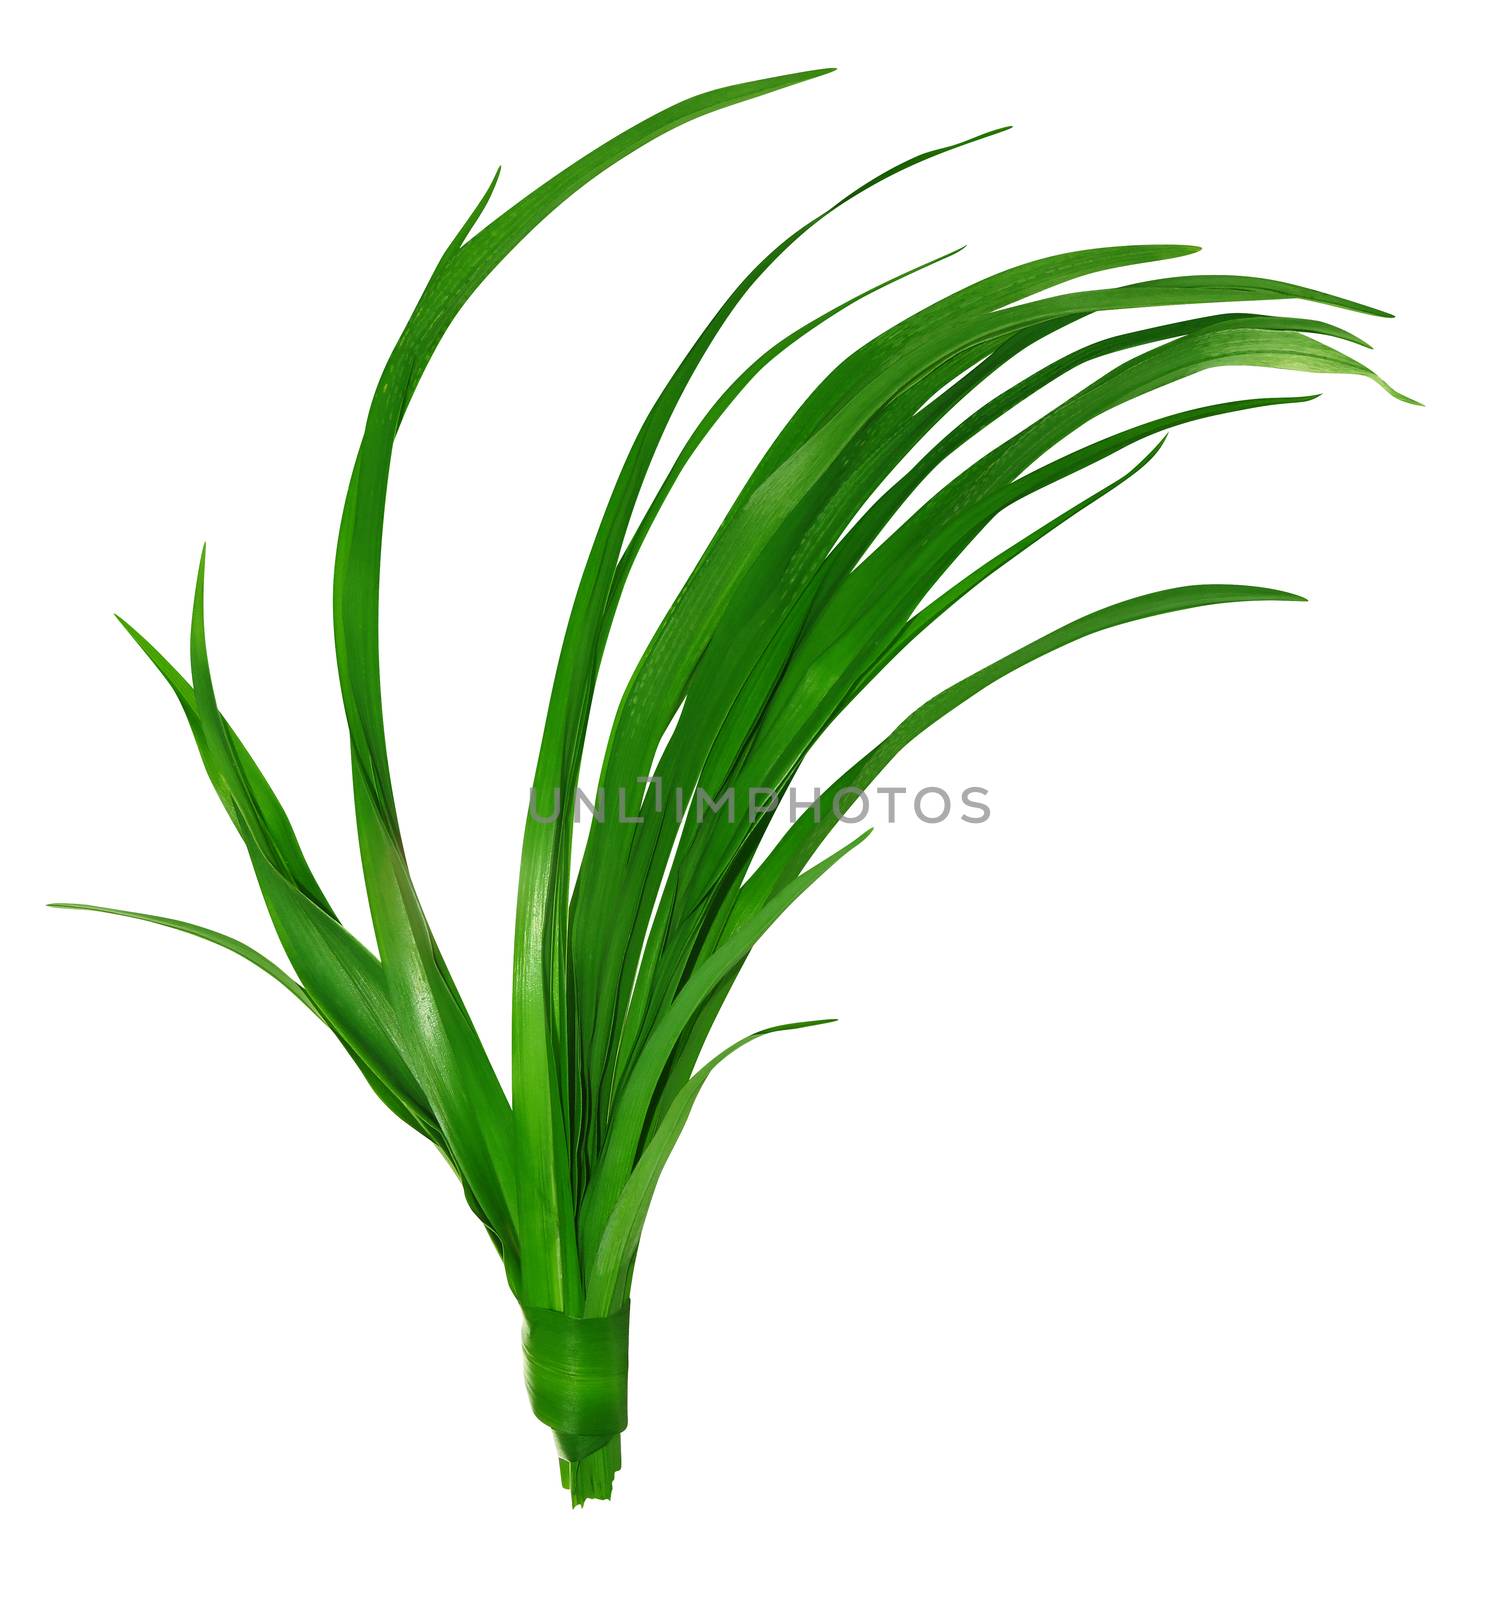 Long blades of green grass isolated on white background.